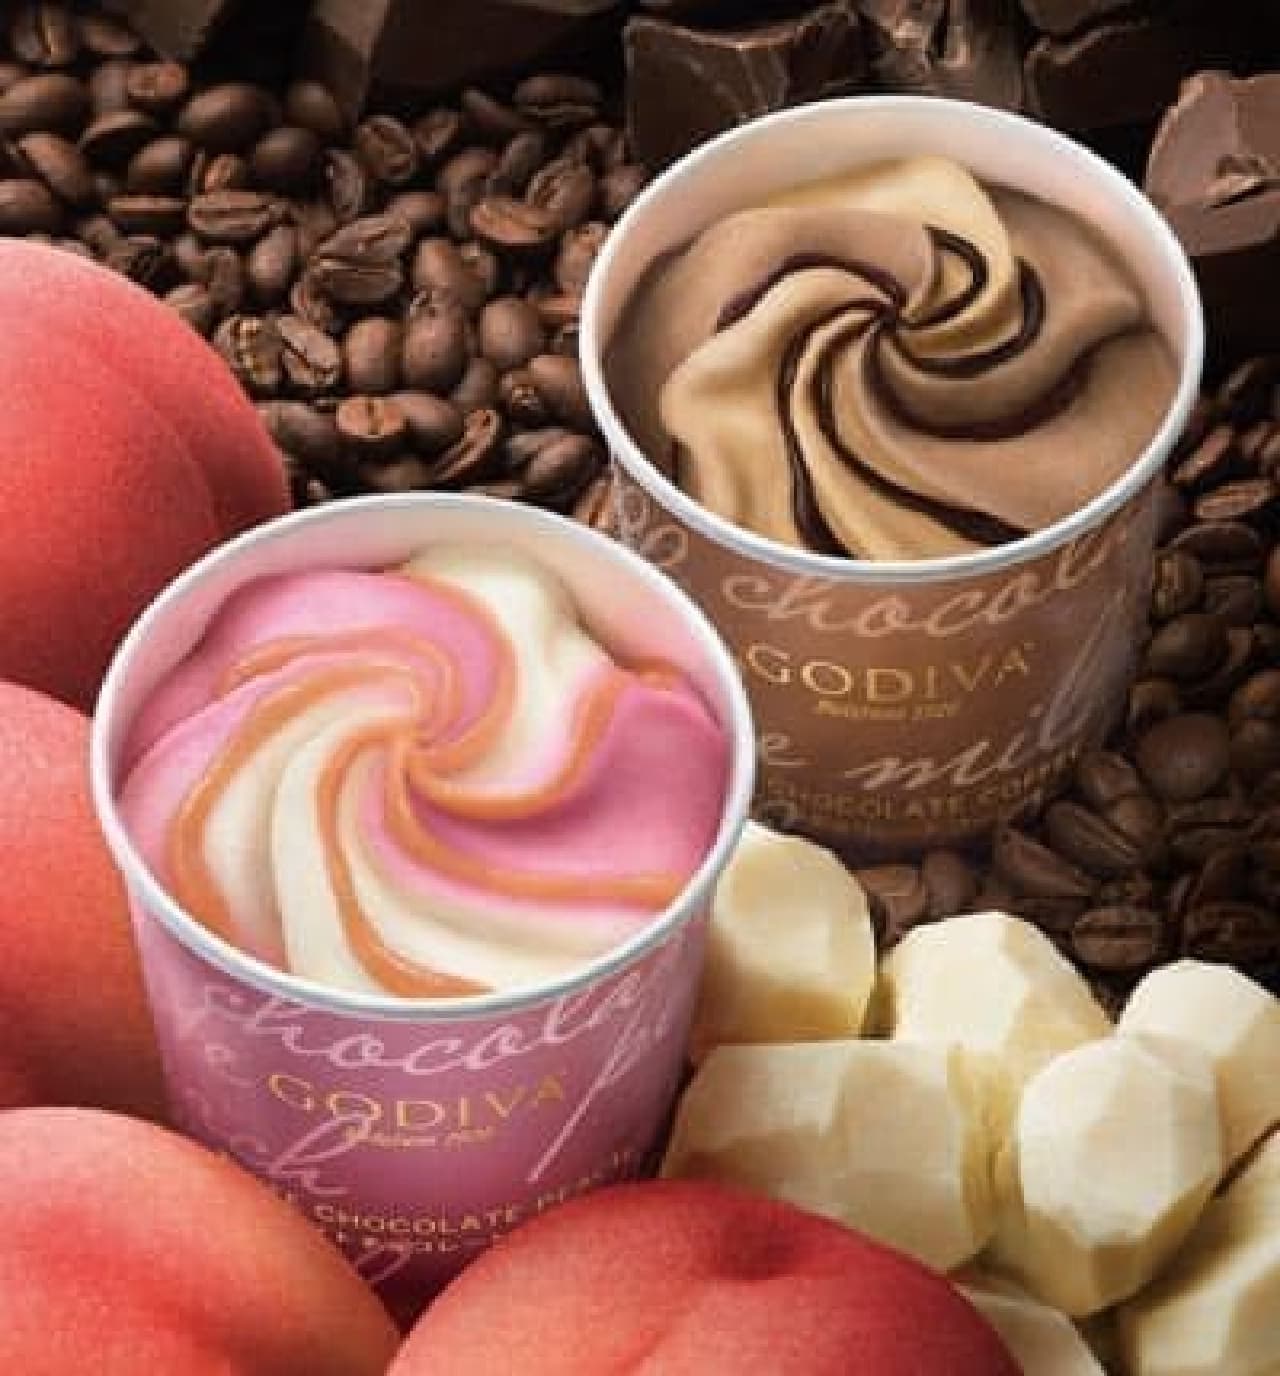 Two new flavors for Godiva's cup ice